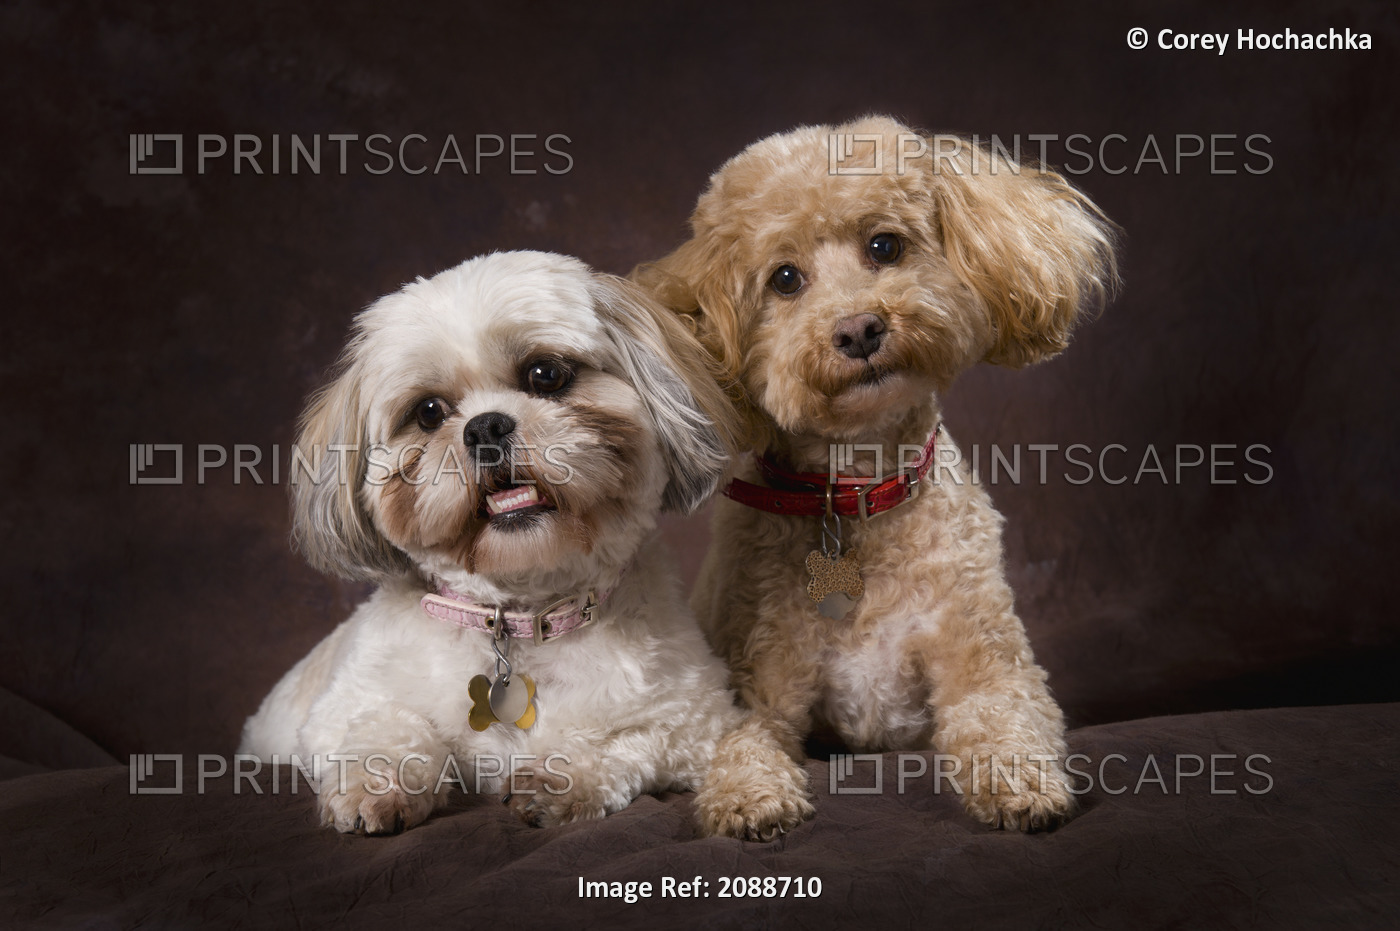 A Shihtzu And A Poodle On A Brown Backdrop; St. Albert, Alberta, Canada